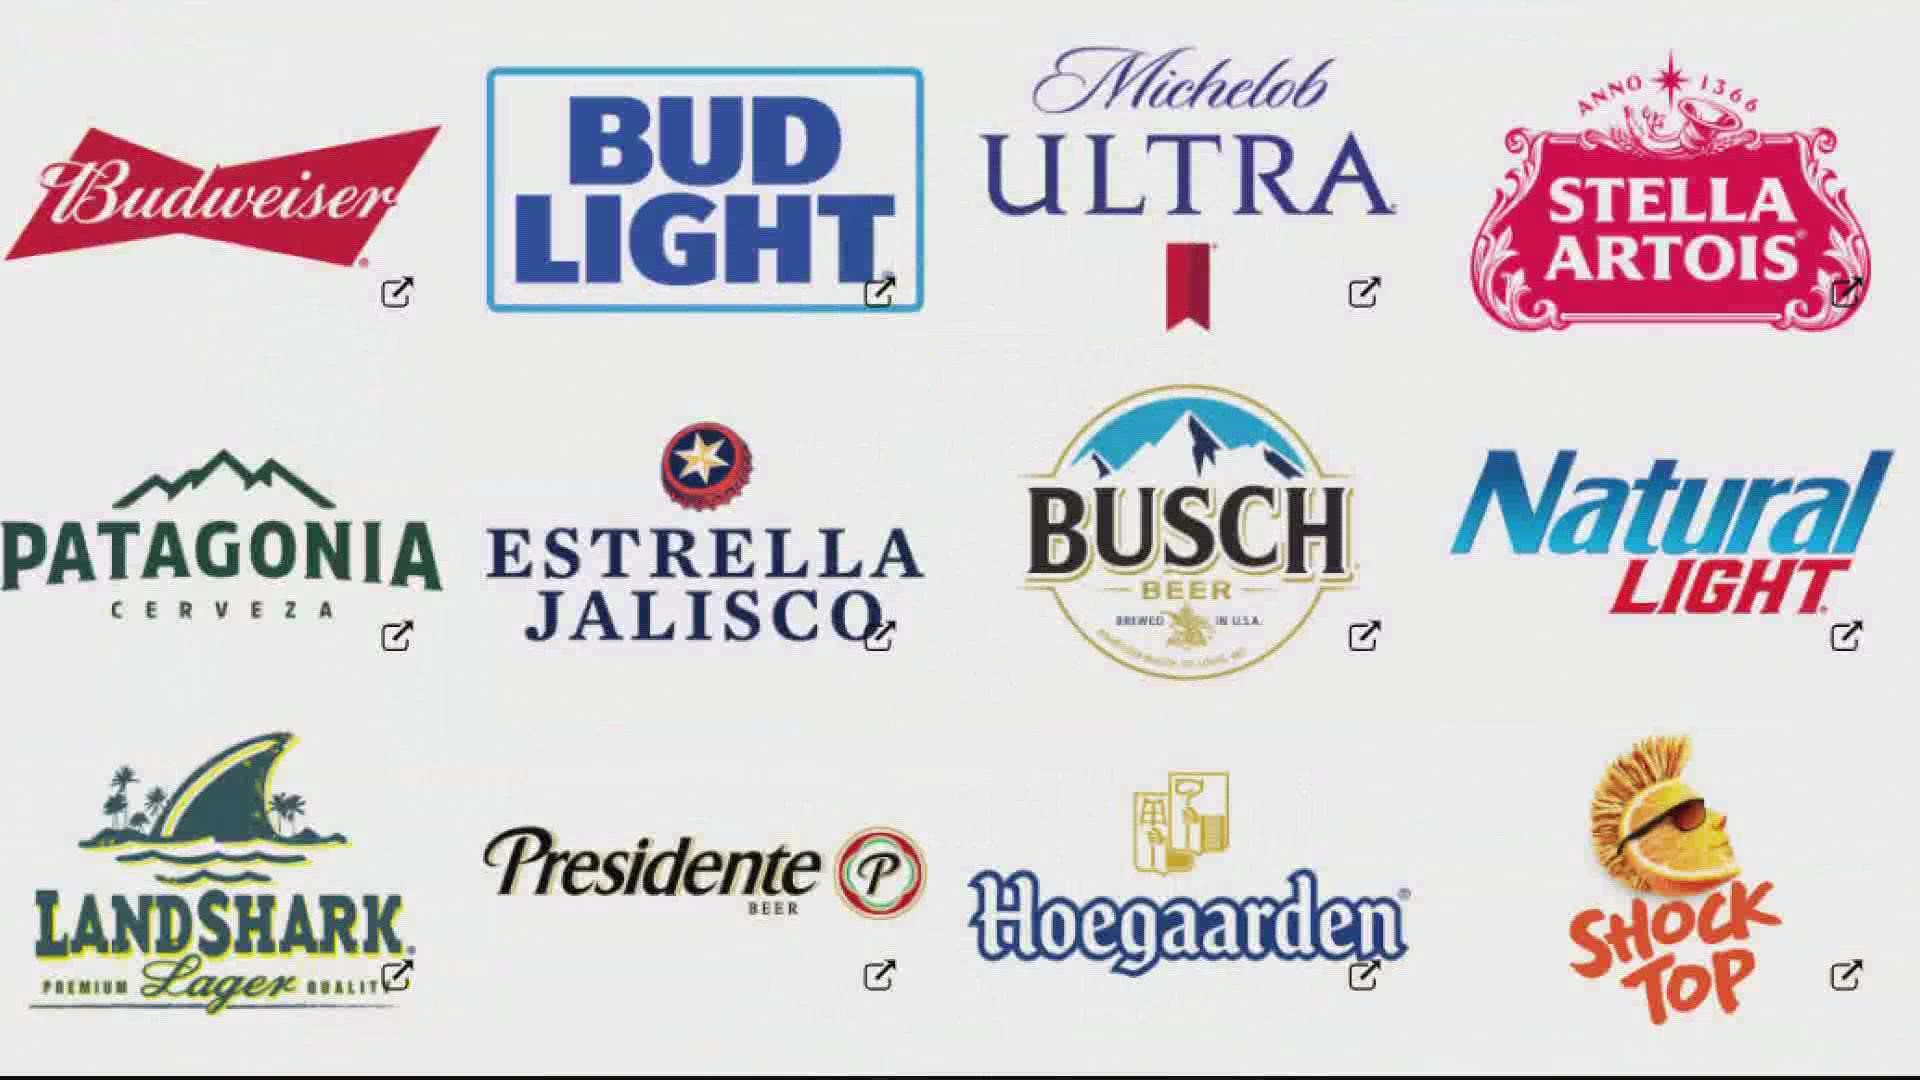 The brewing company is one of the Commanders' biggest corporate sponsors. It is also the official beer sponsor of the NFL.